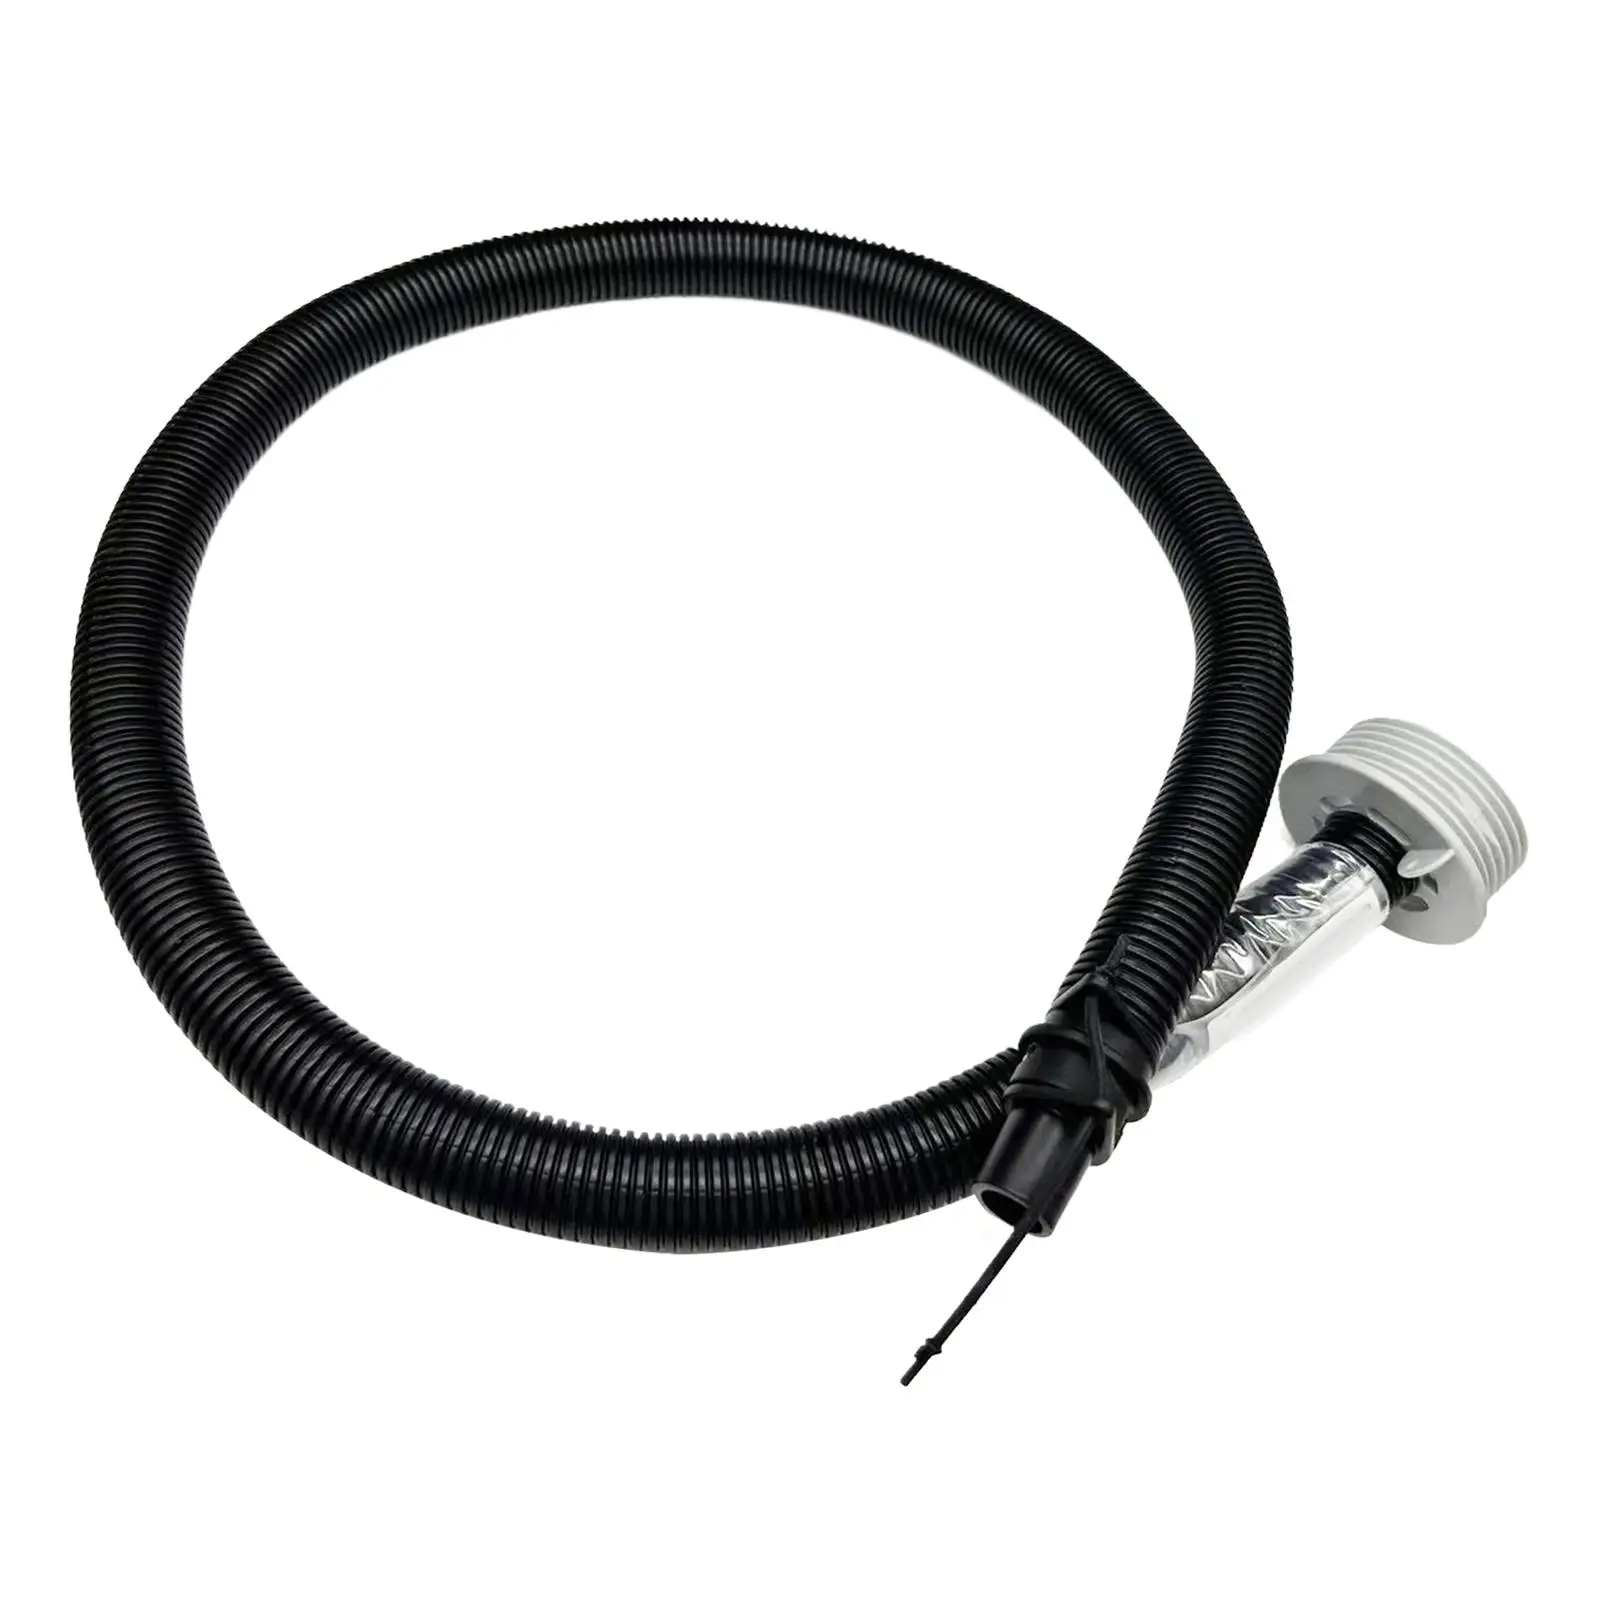 

SPA Inflation Hose Multipurpose Replacement Part Hot Tub Inflation Hose Pipe Tube Hot Tub Air Inflate Hose for Spas Lawns Garden